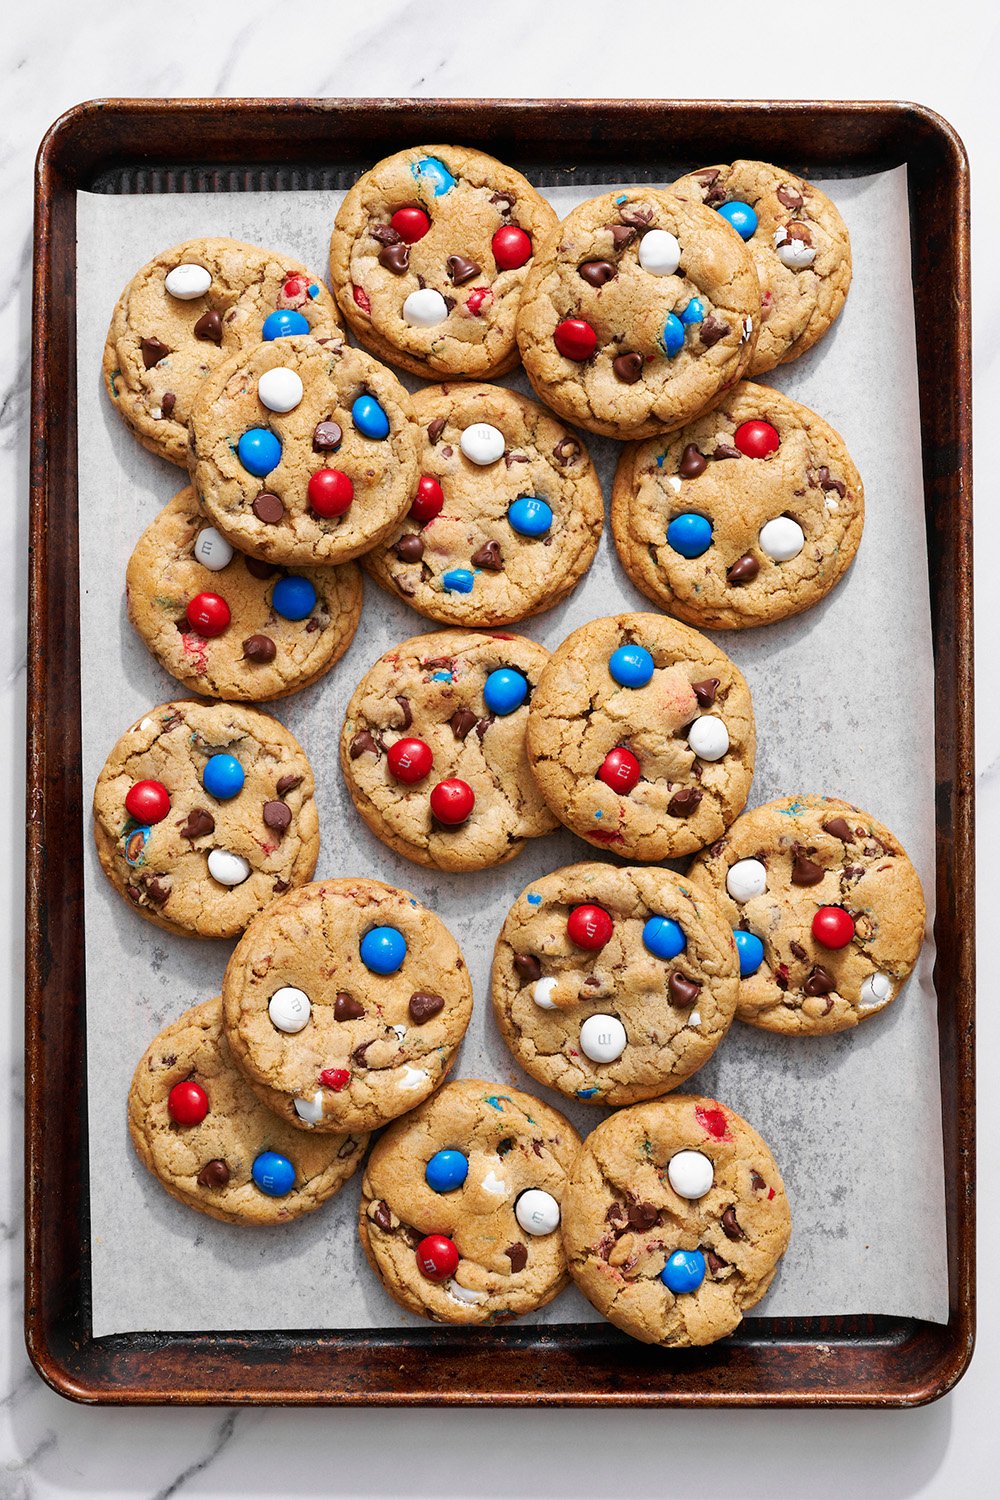 my Bakery Style Chocolate Chip Cookies, made using red, white, and blue M&Ms for patriotic festive vibes